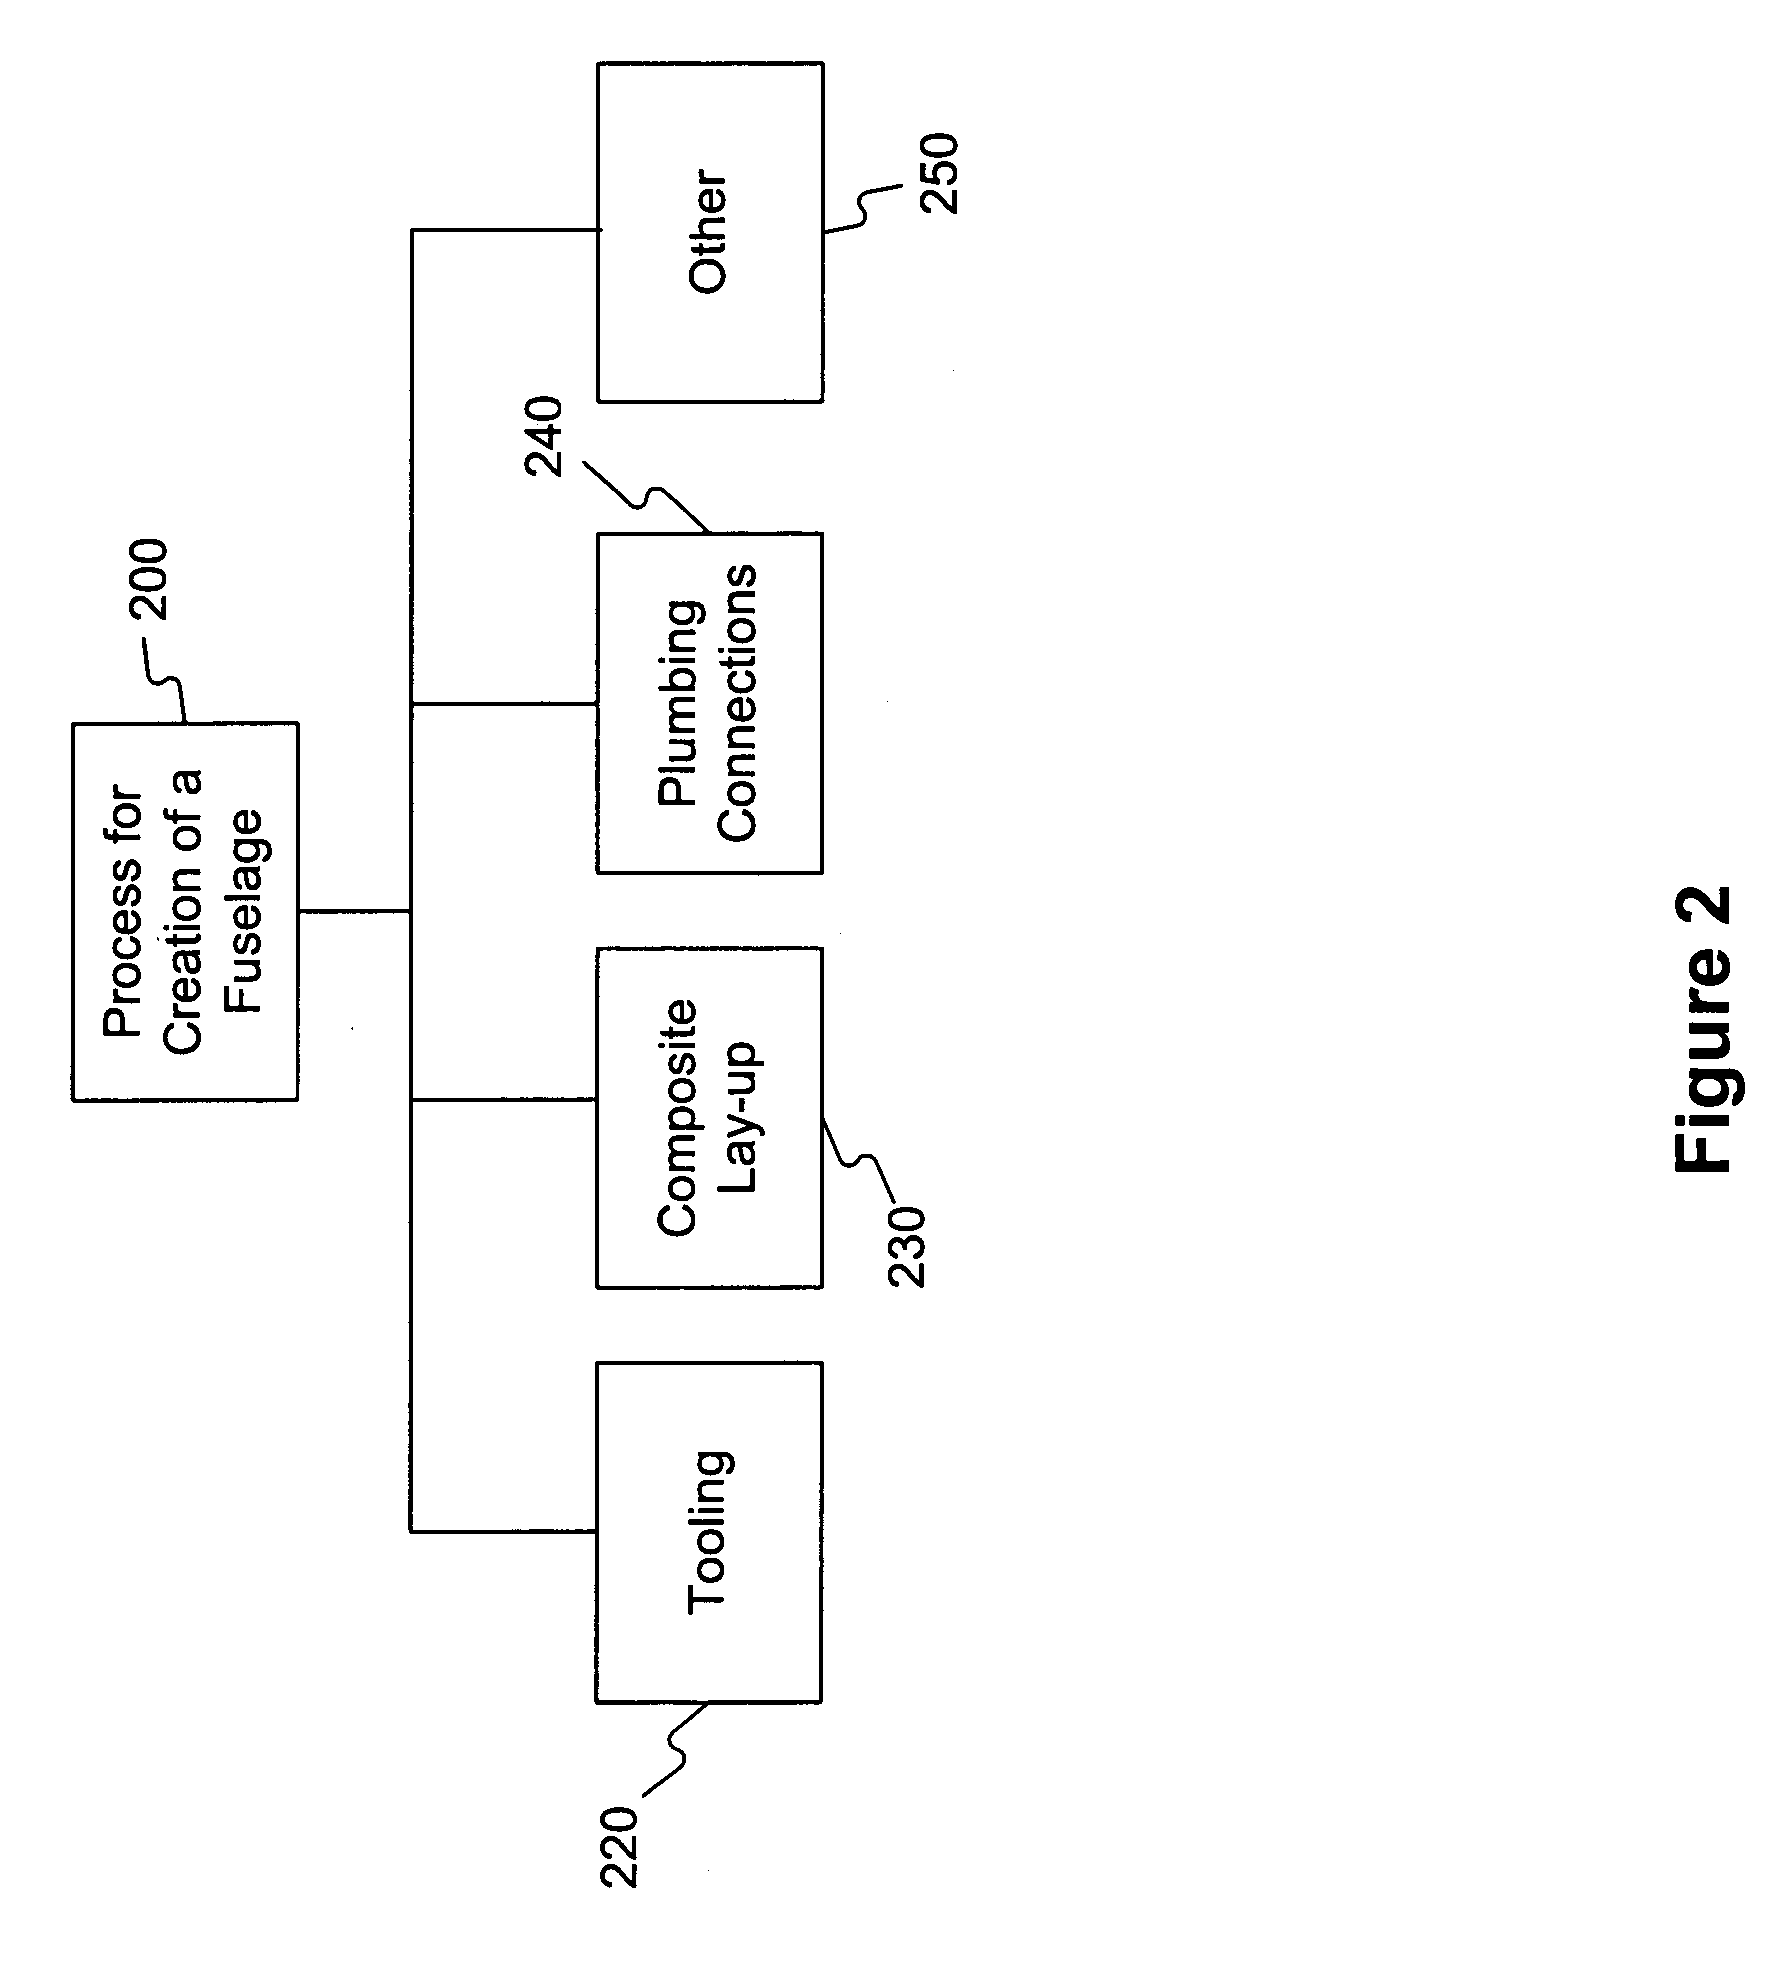 Media removal apparatus and methods of removing media